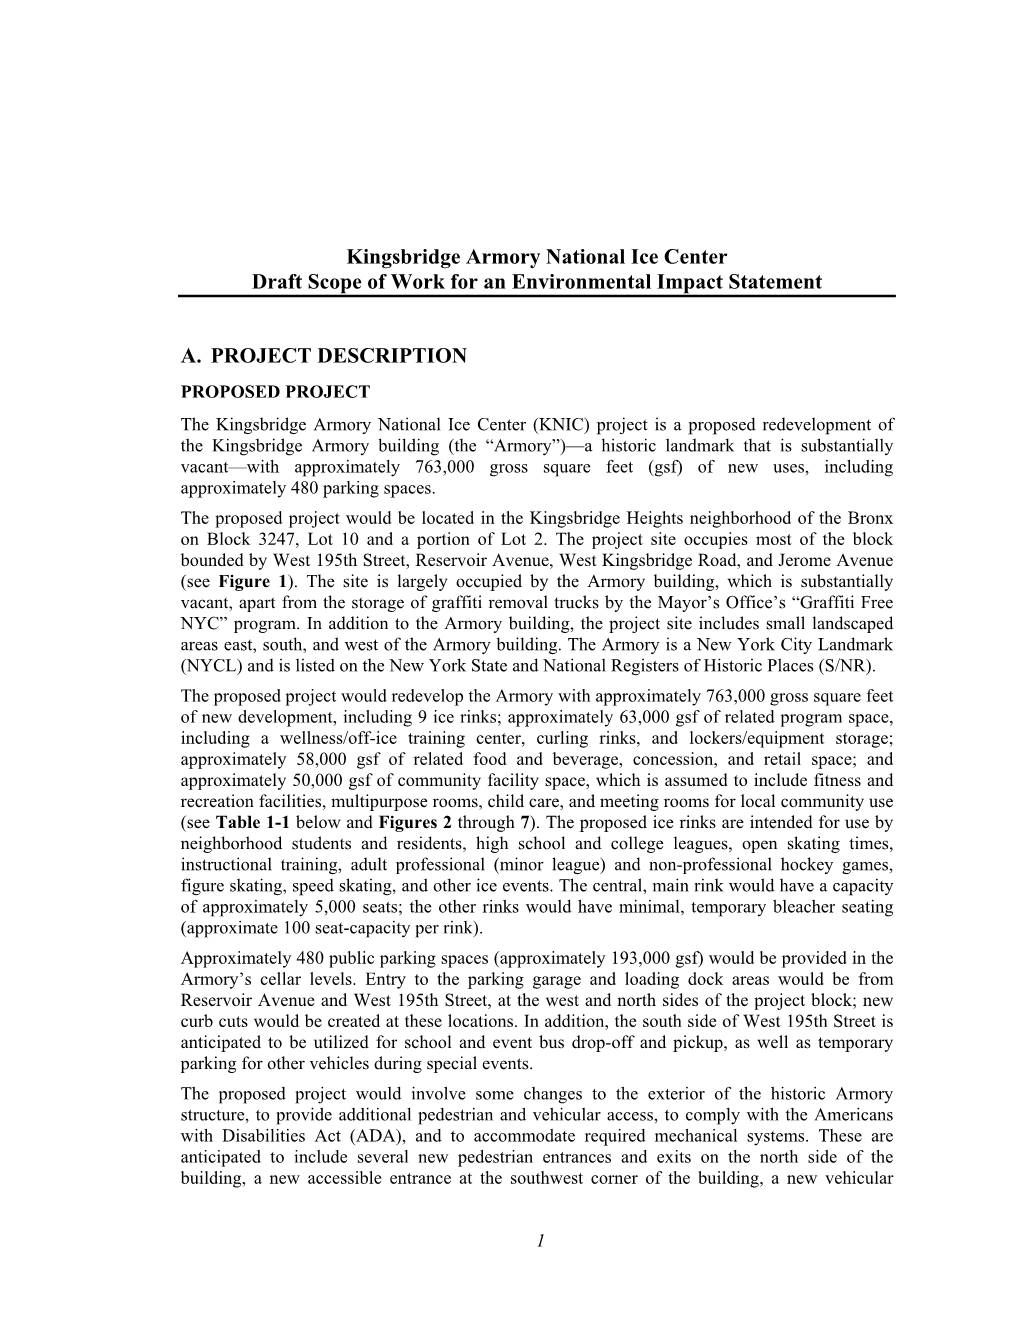 Draft Scope of Work for an Environmental Impact Statement